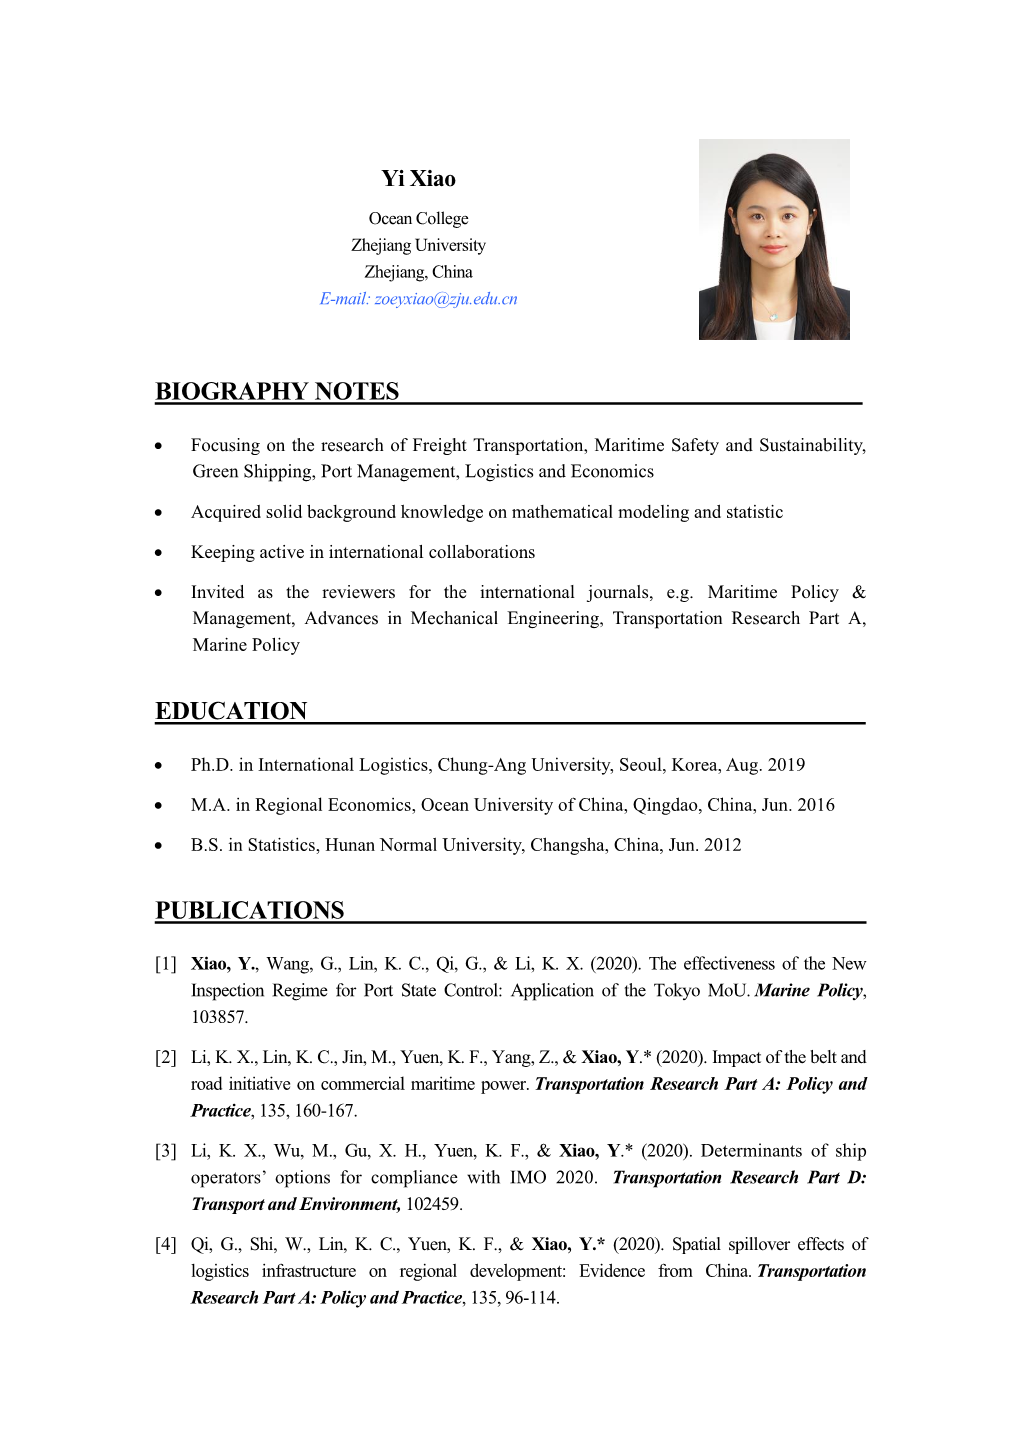 Biography Notes Education Publications